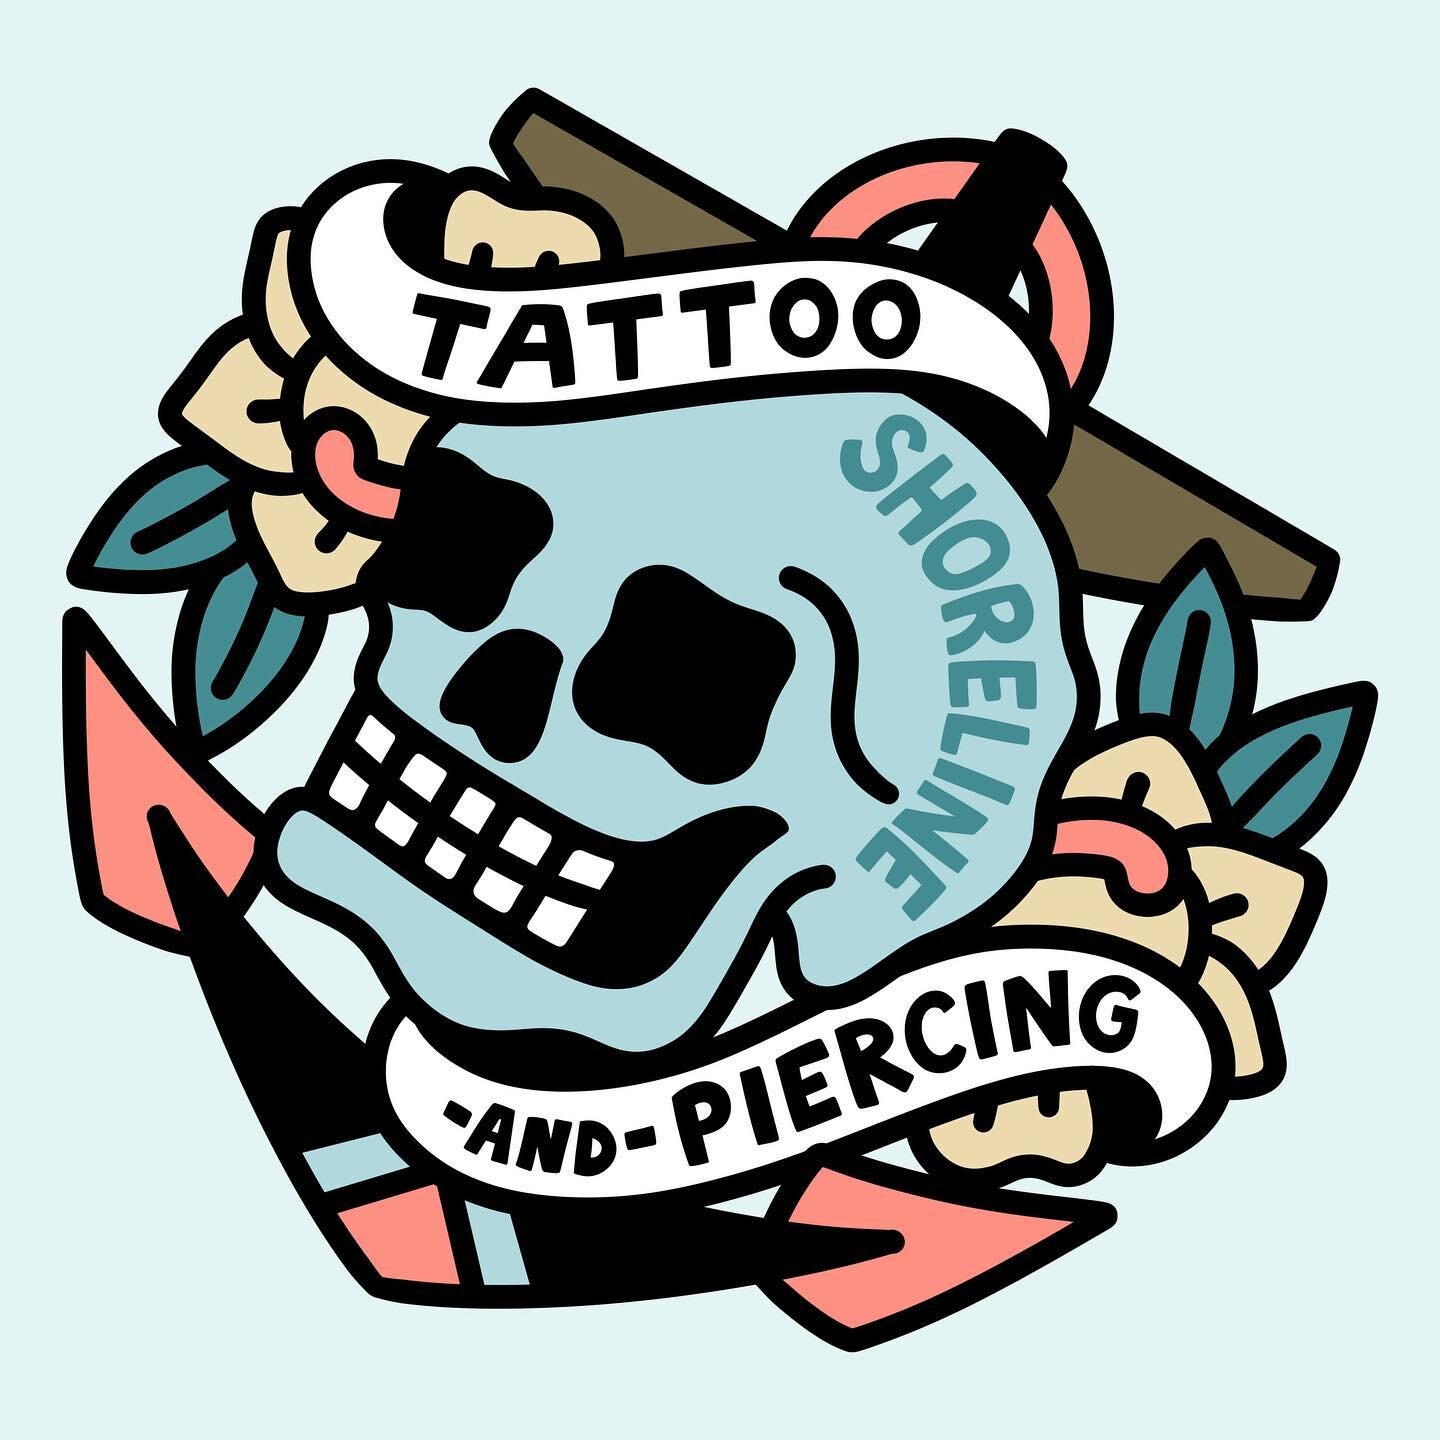 It&rsquo;s a vibe ✌️

Link in bio to connect with tattoo artists and book your next piercing. 

We are located in the Seaport Plaza at 161 E Main St, Tuckerton, NJ. Tattoos and piercings are provided by appointment to clients 18 or older in a chill, 